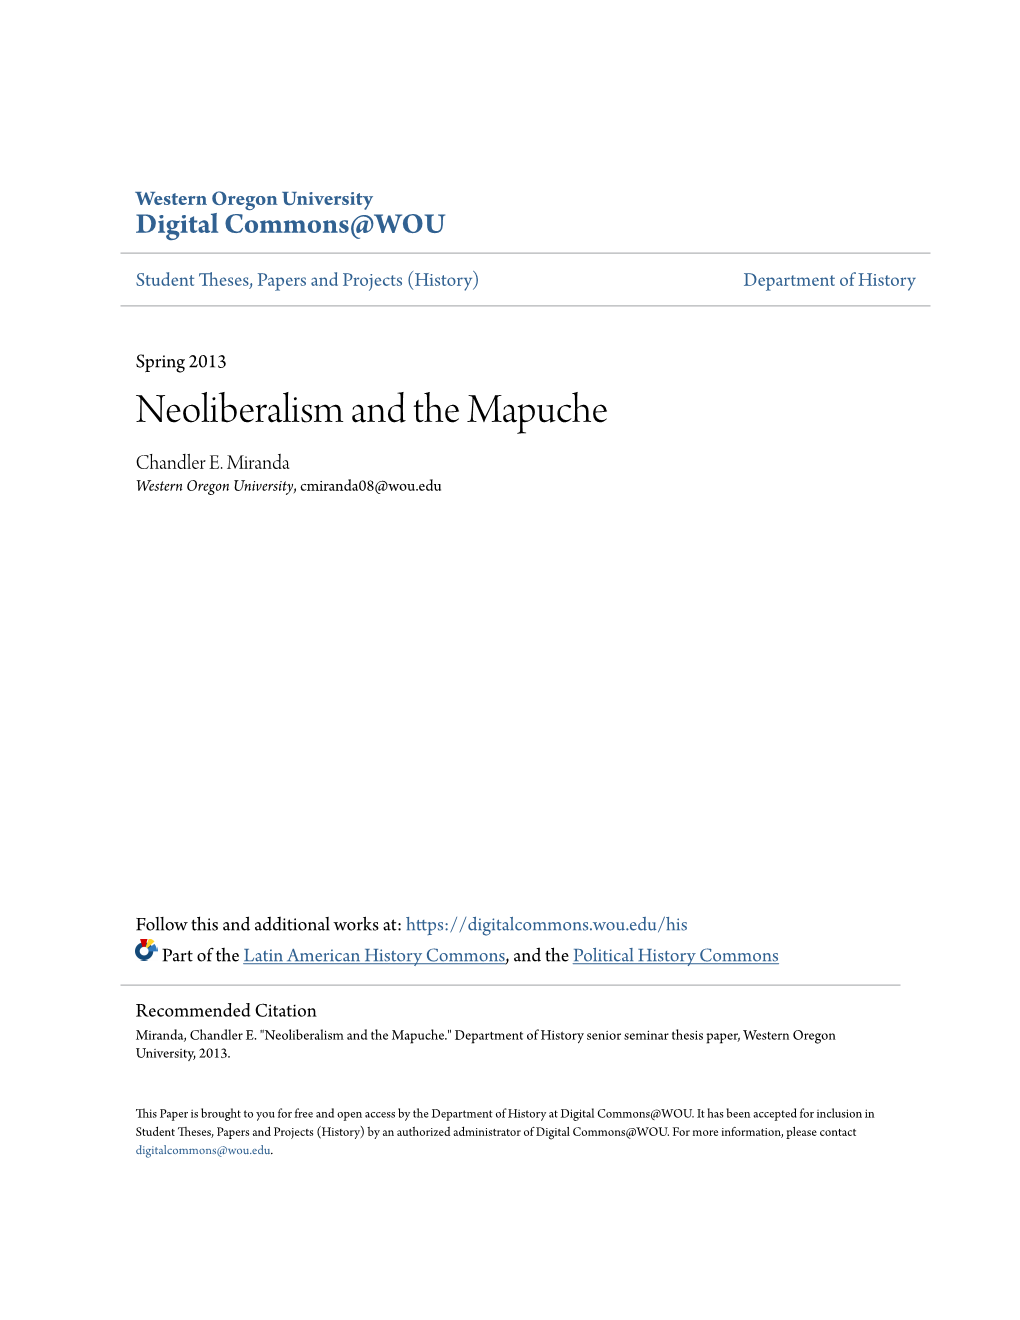 Neoliberalism and the Mapuche Chandler E